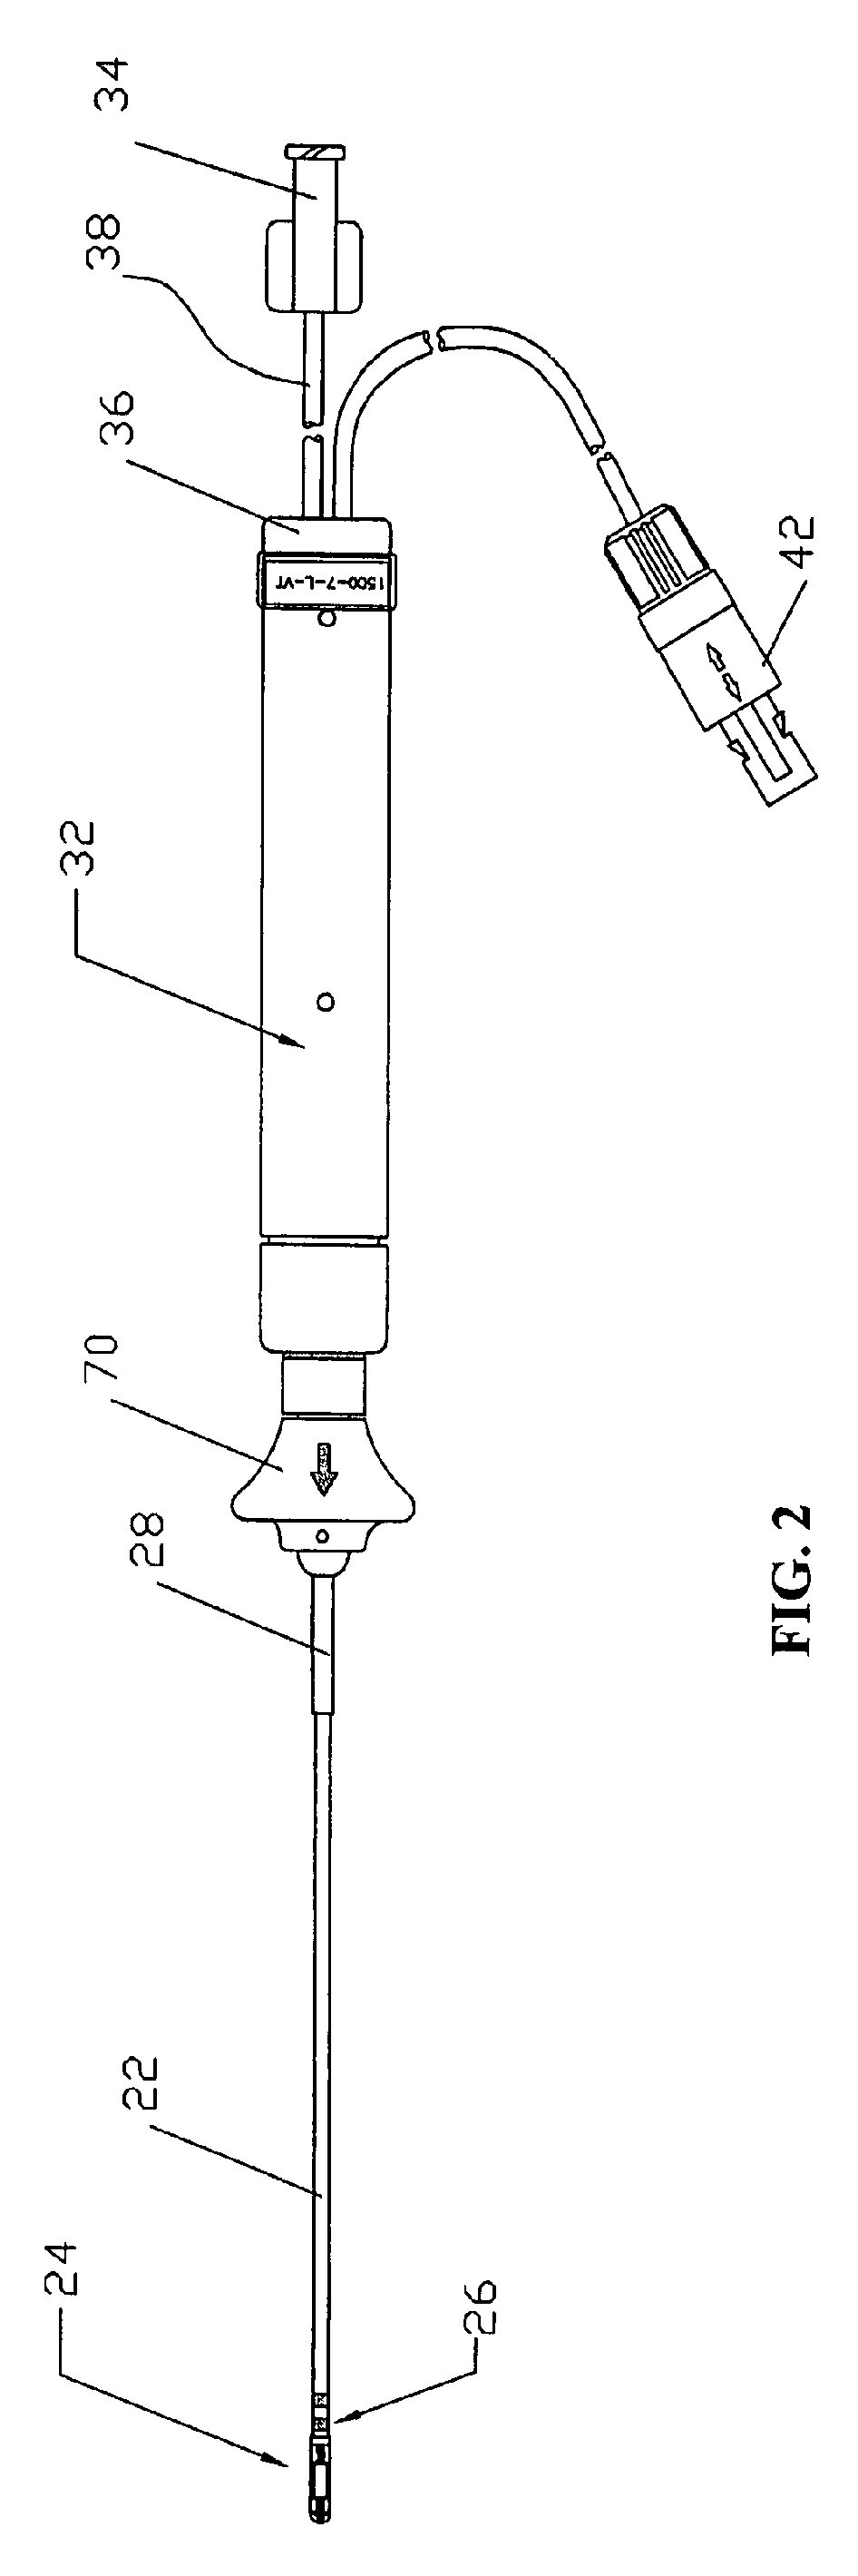 Ultrasound ablation apparatus with discrete staggered ablation zones